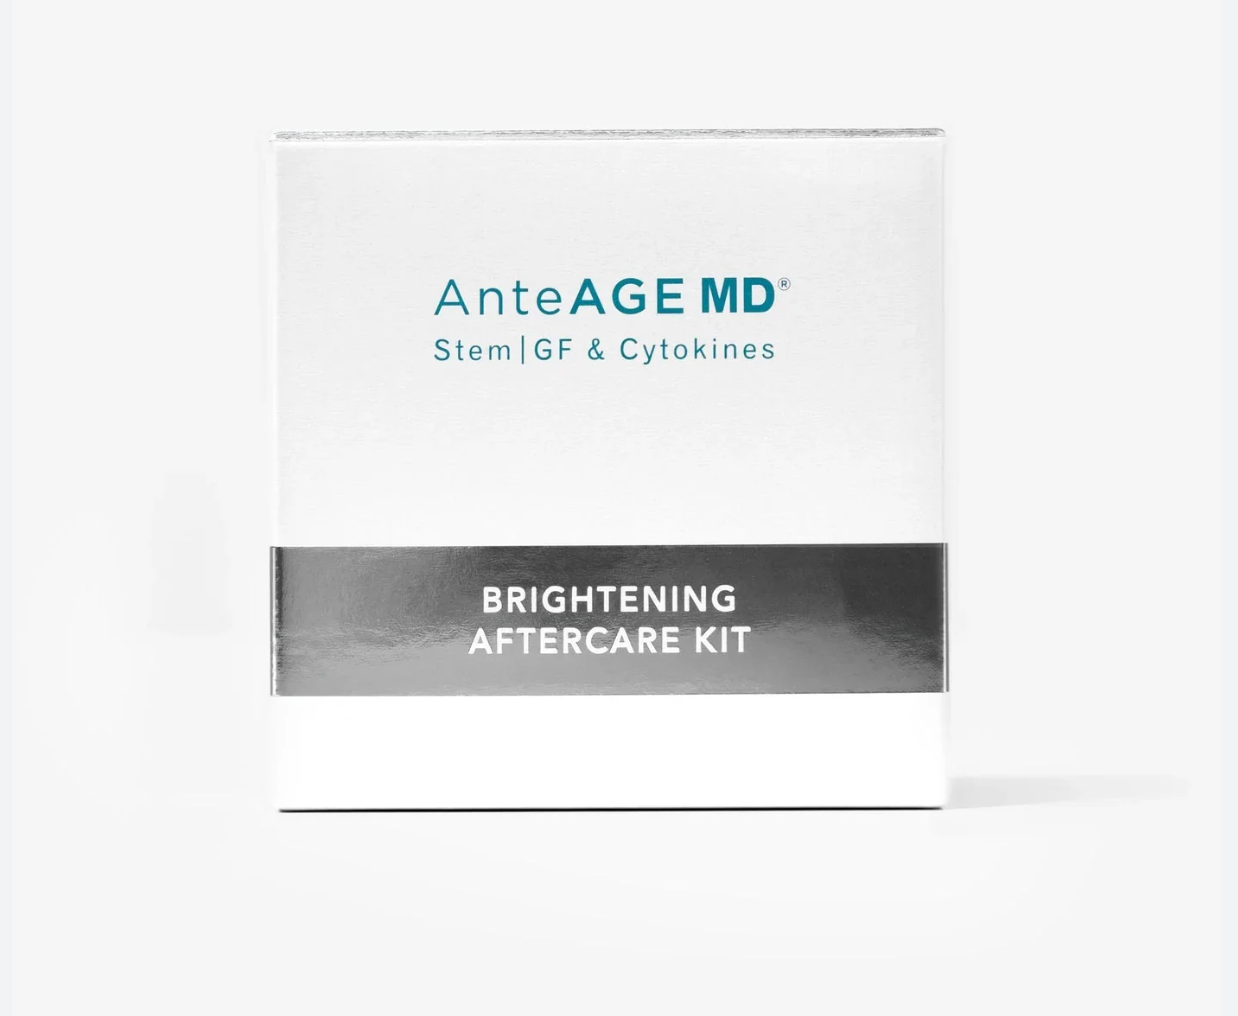 AnteAGE MD Brightening After Care Kit